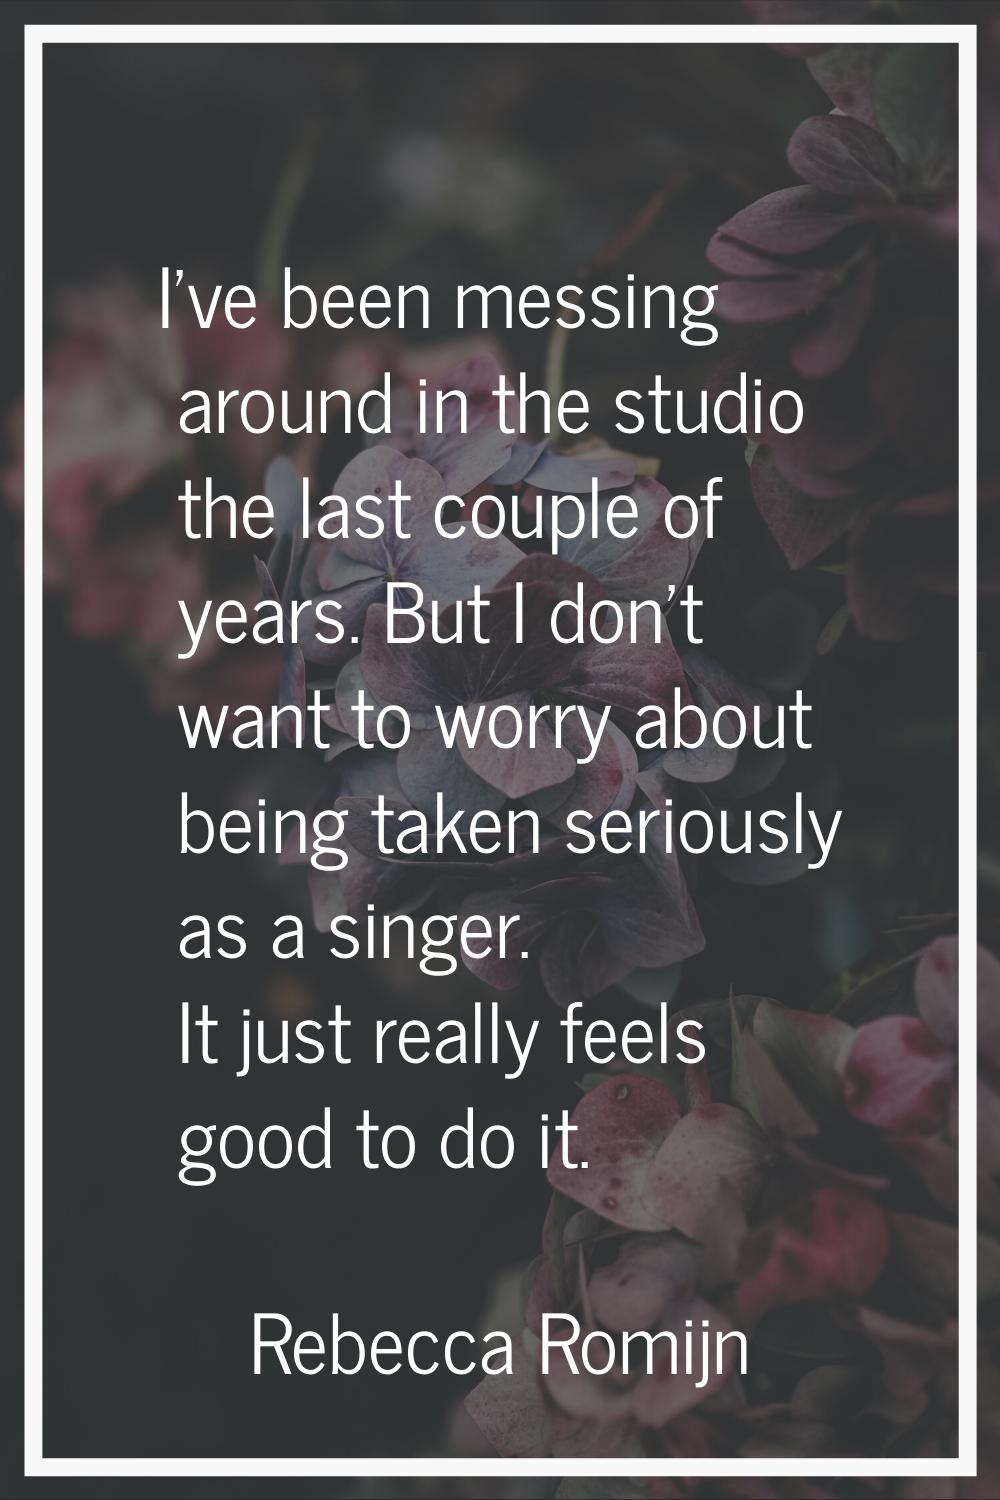 I've been messing around in the studio the last couple of years. But I don't want to worry about be